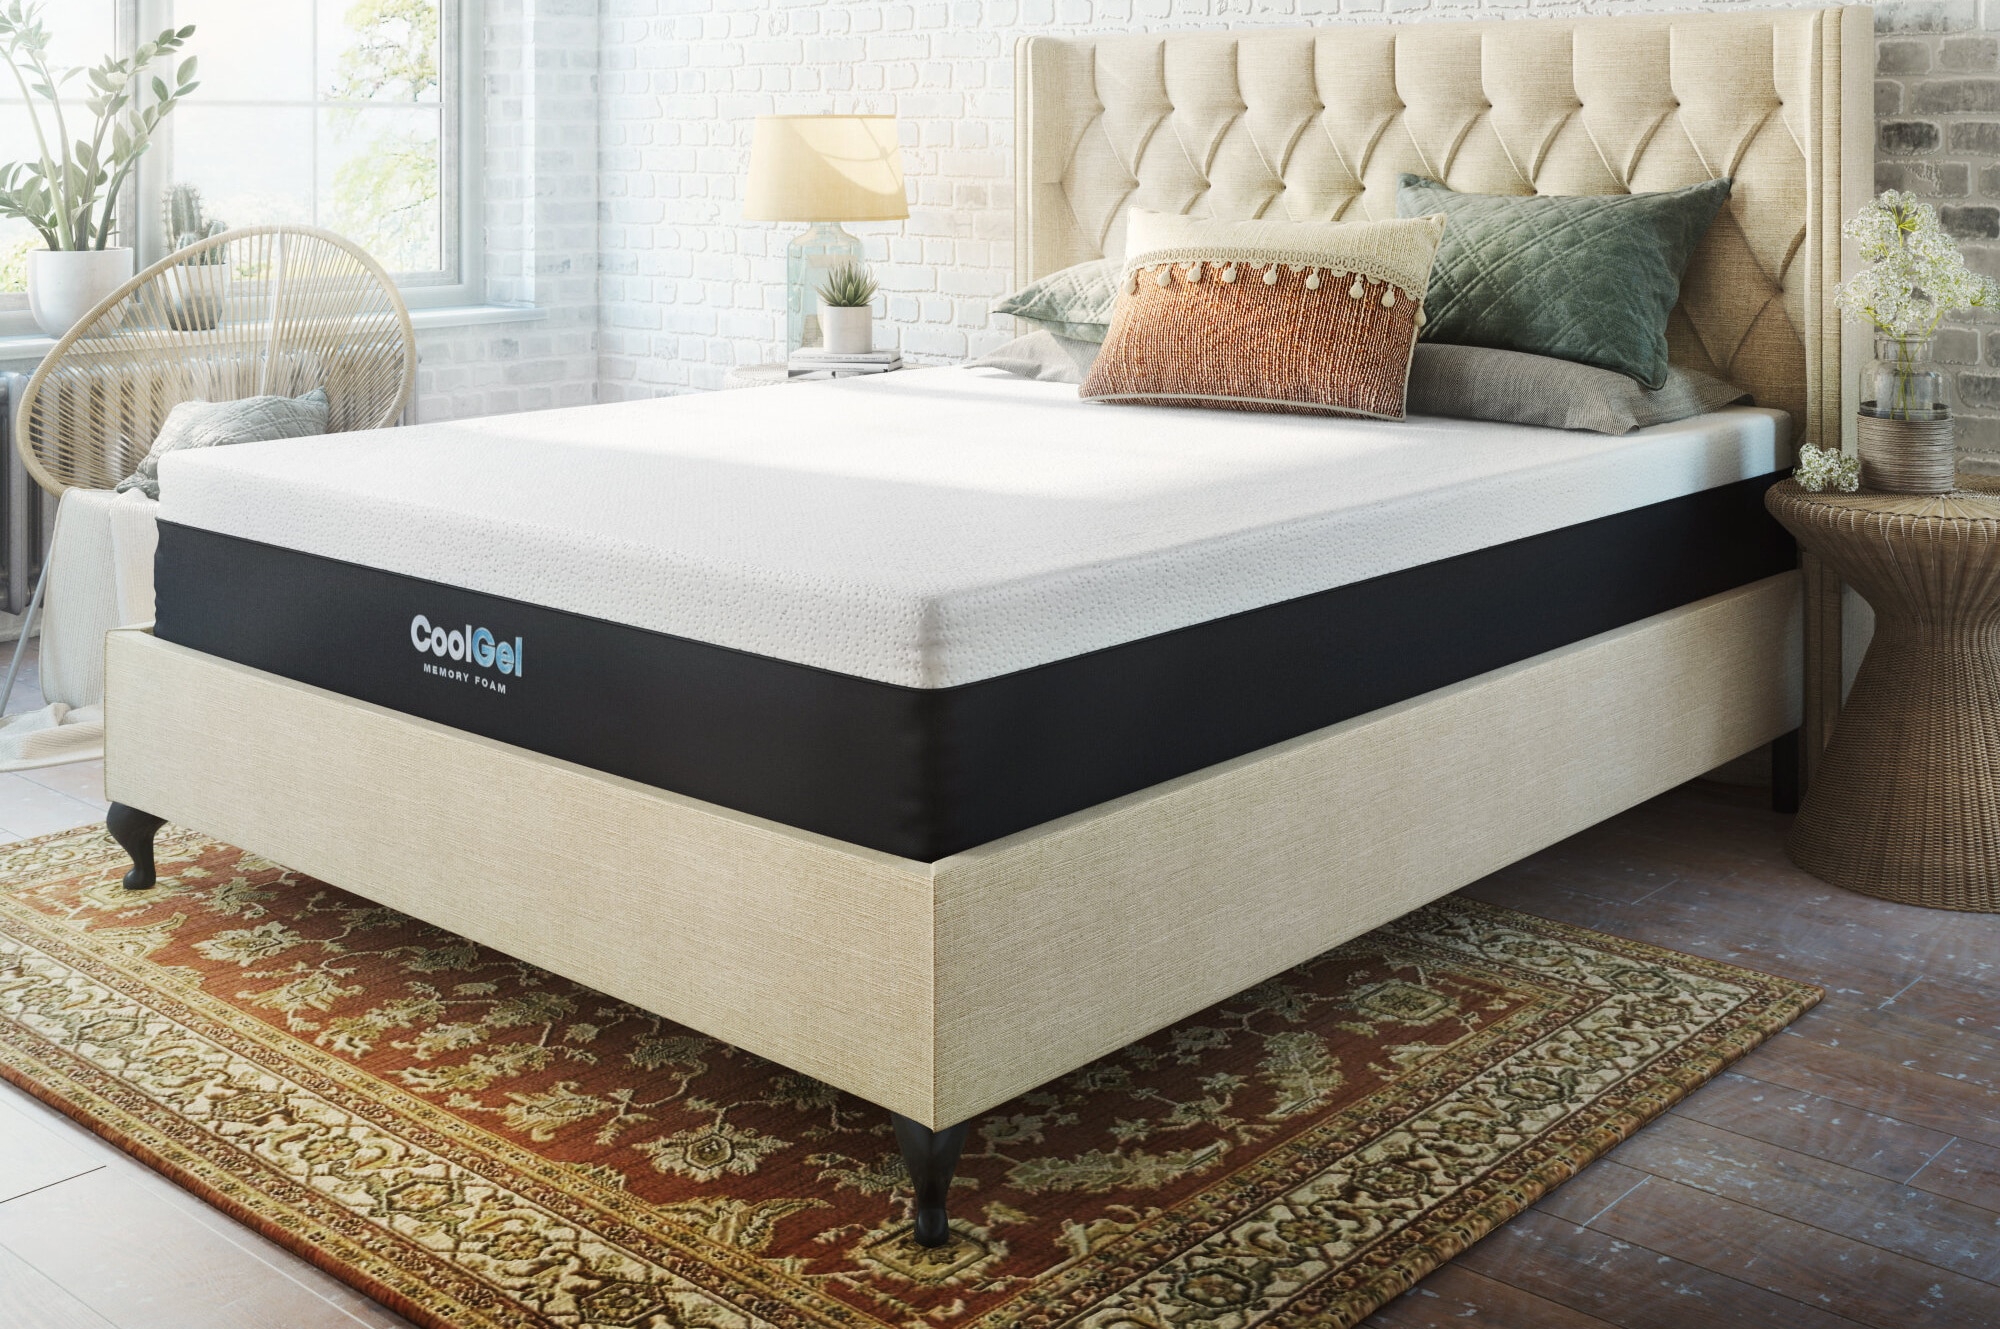 review on classic brand mattresses